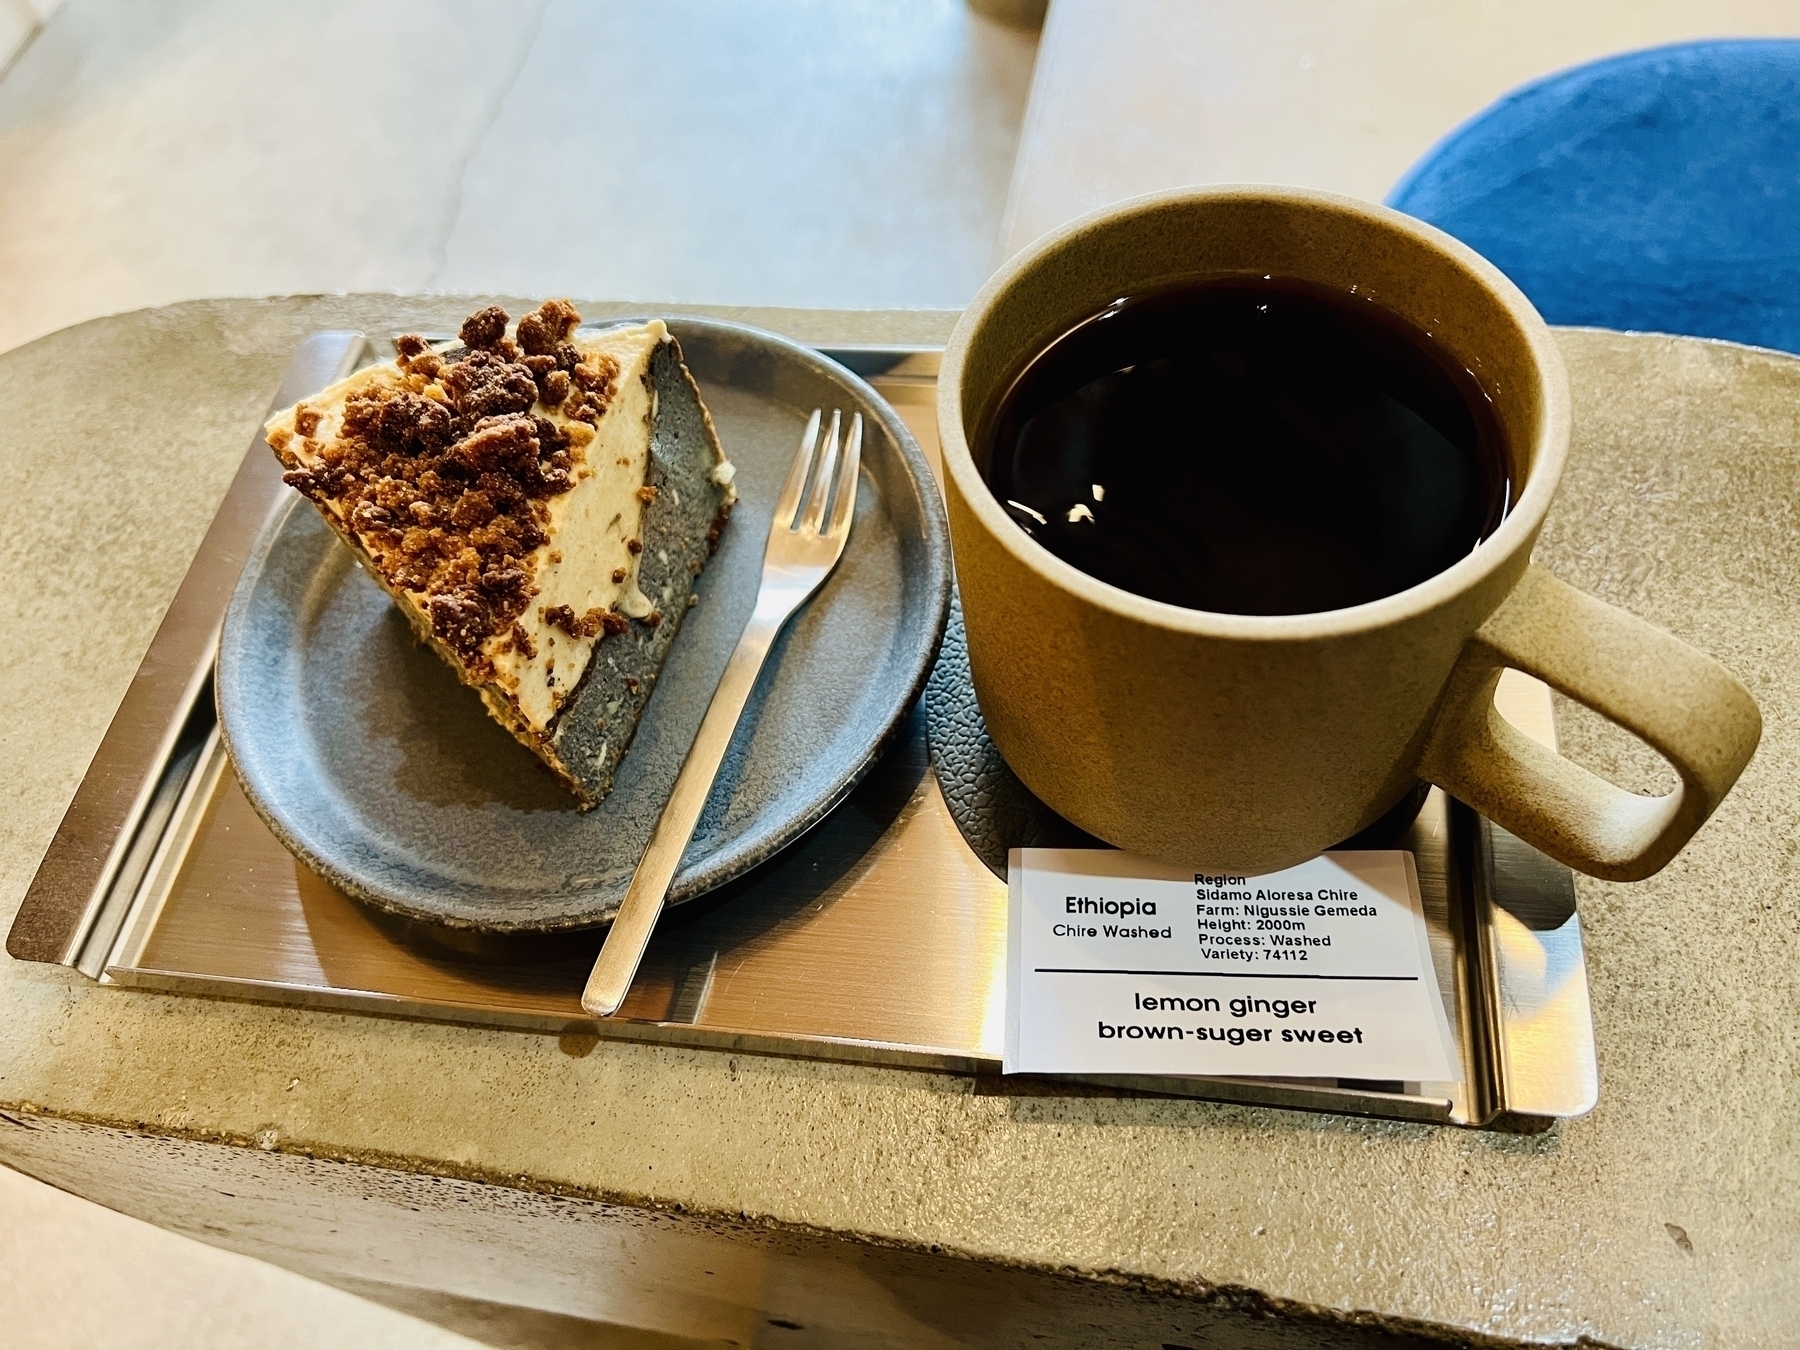 Close shot of a slice of cheesecake and a cup of black coffee. A paper label describes the coffee: &10;&10;Ethiopia&10;Chire Washed&10;Region&10;Sidamo Aloresa Chire&10;Farm: Nigussie Gemeda&10;Height: 2000m&10;Process: Washed&10;Variety: 74112&10;lemon ginger brown-suger sweet